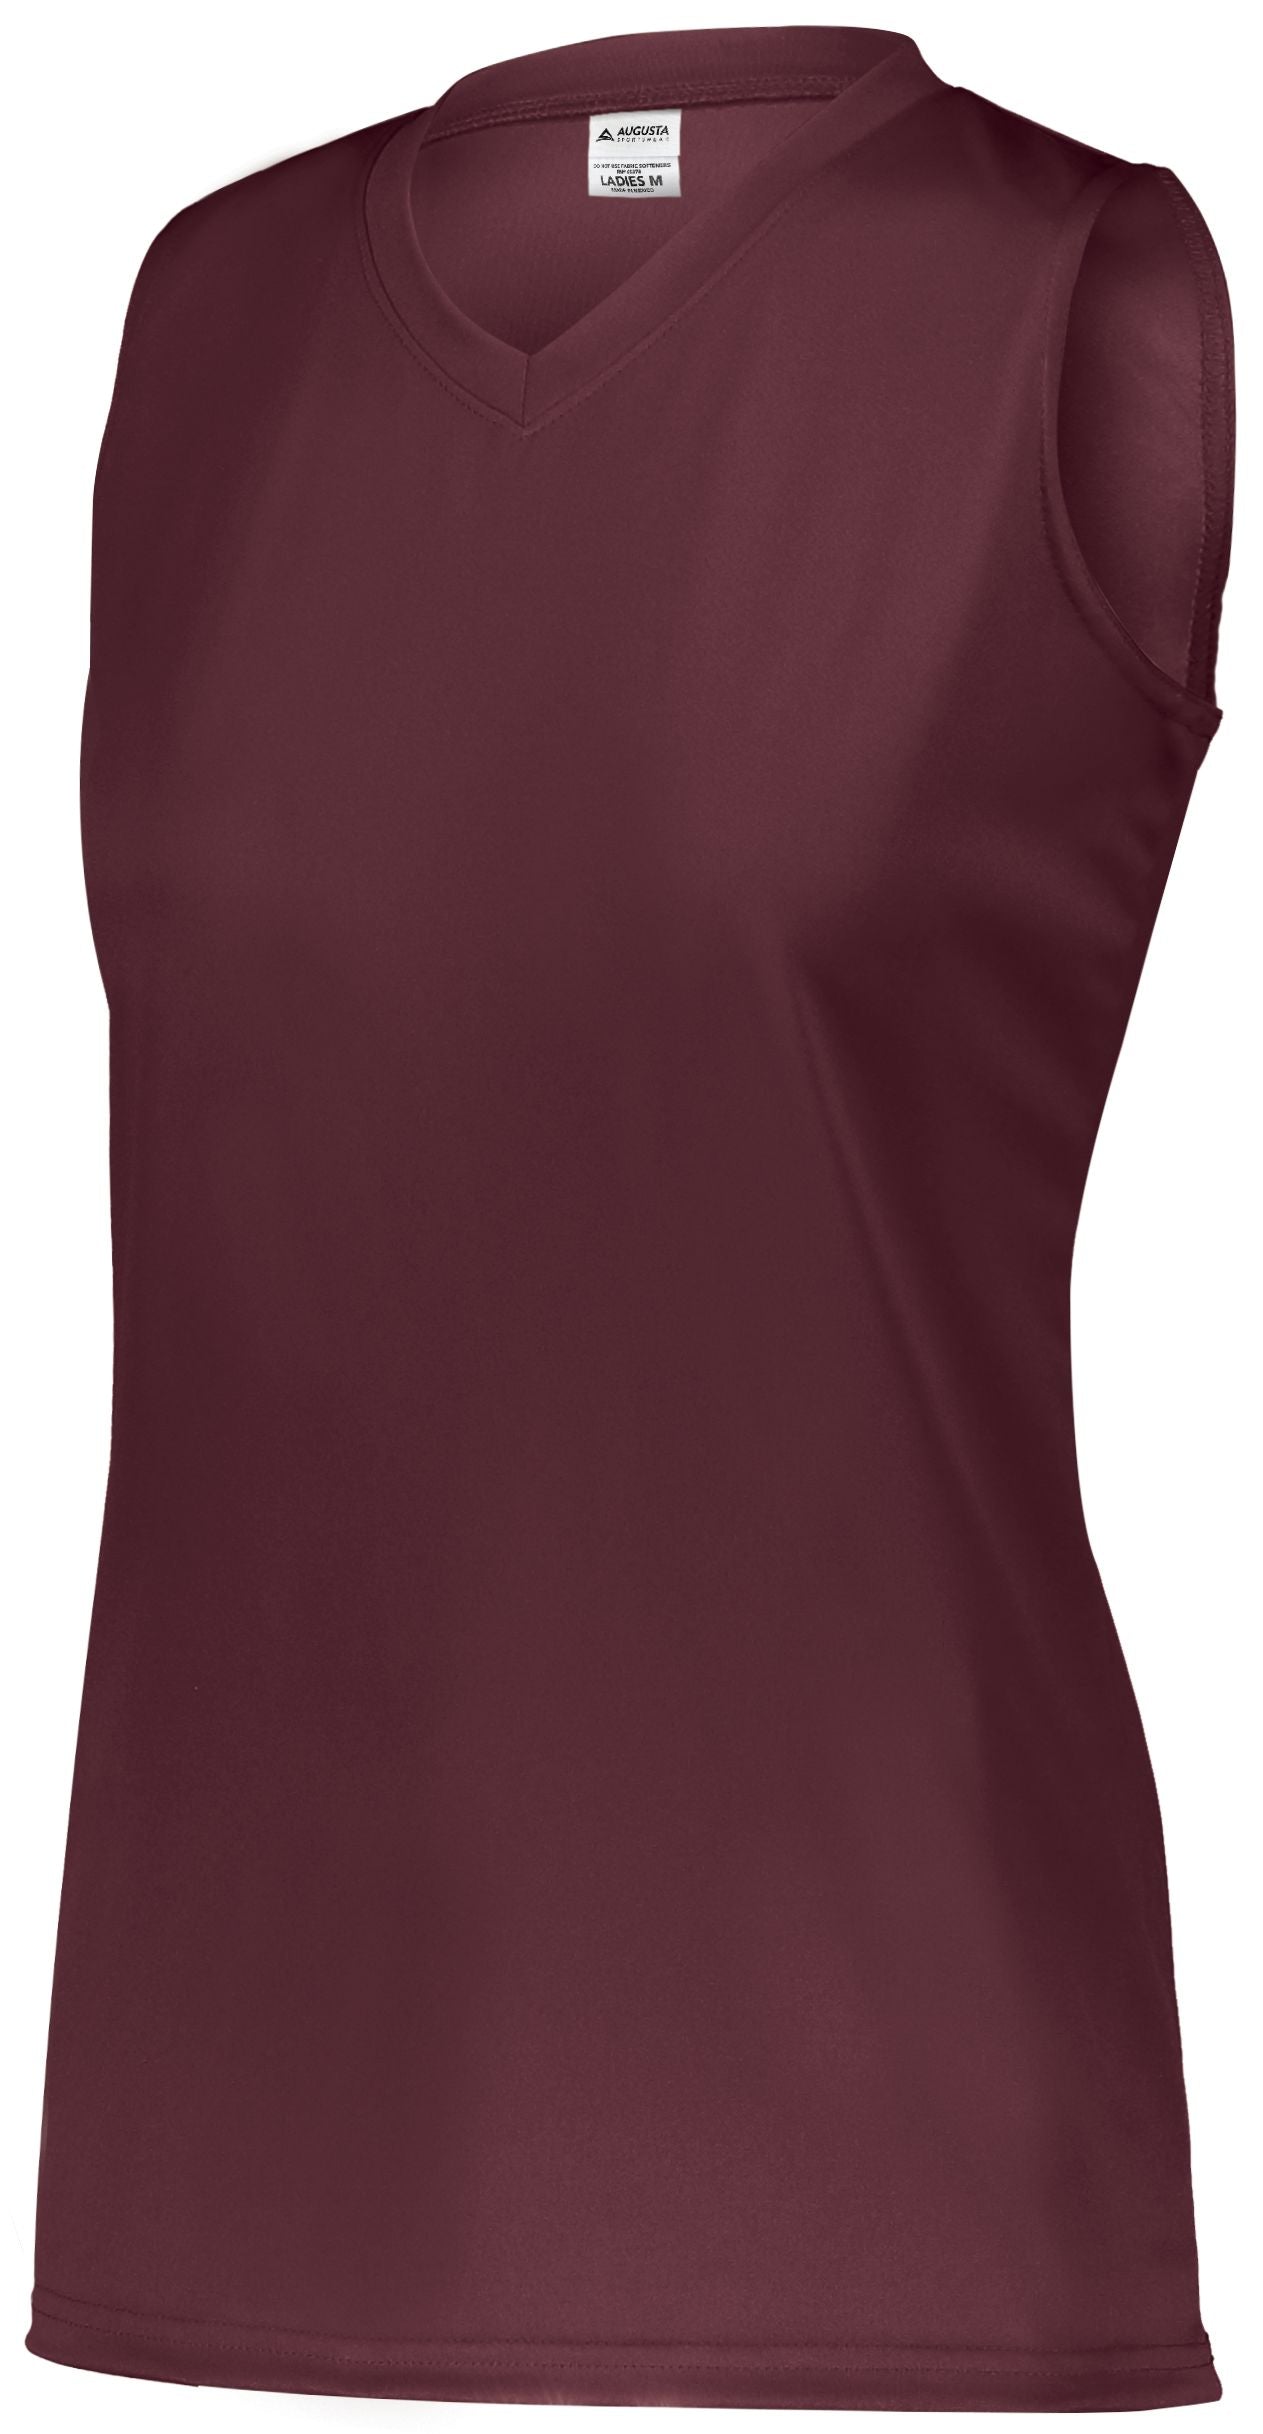 Augusta Sportswear Girls Attain Wicking Sleeveless Jersey in Maroon (Hlw)  -Part of the Girls, Augusta-Products, Softball, Girls-Jersey, Shirts product lines at KanaleyCreations.com